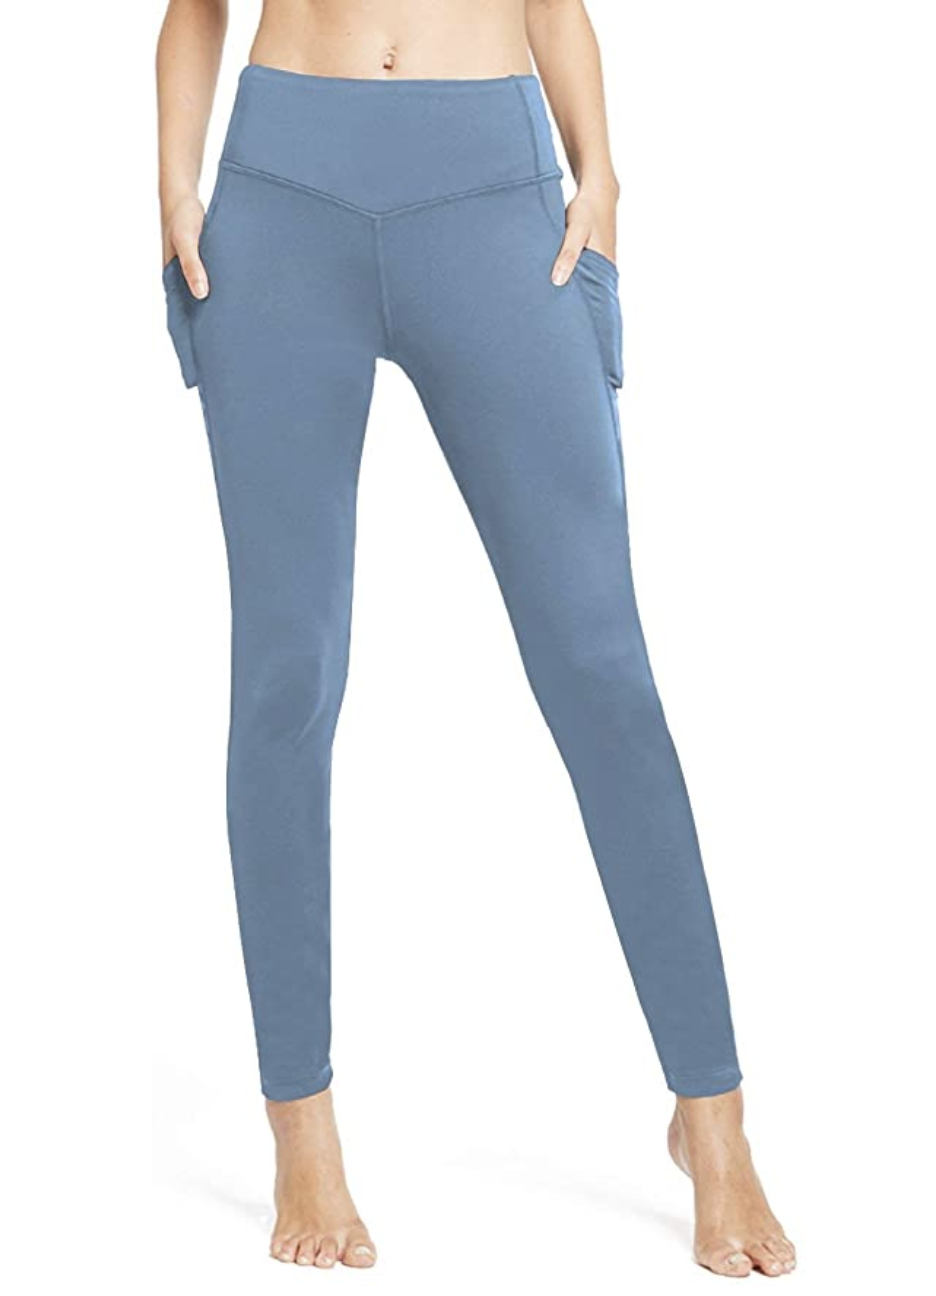 Baleaf Bestselling Leggings Are Fleece-Lined and Winter-Ready